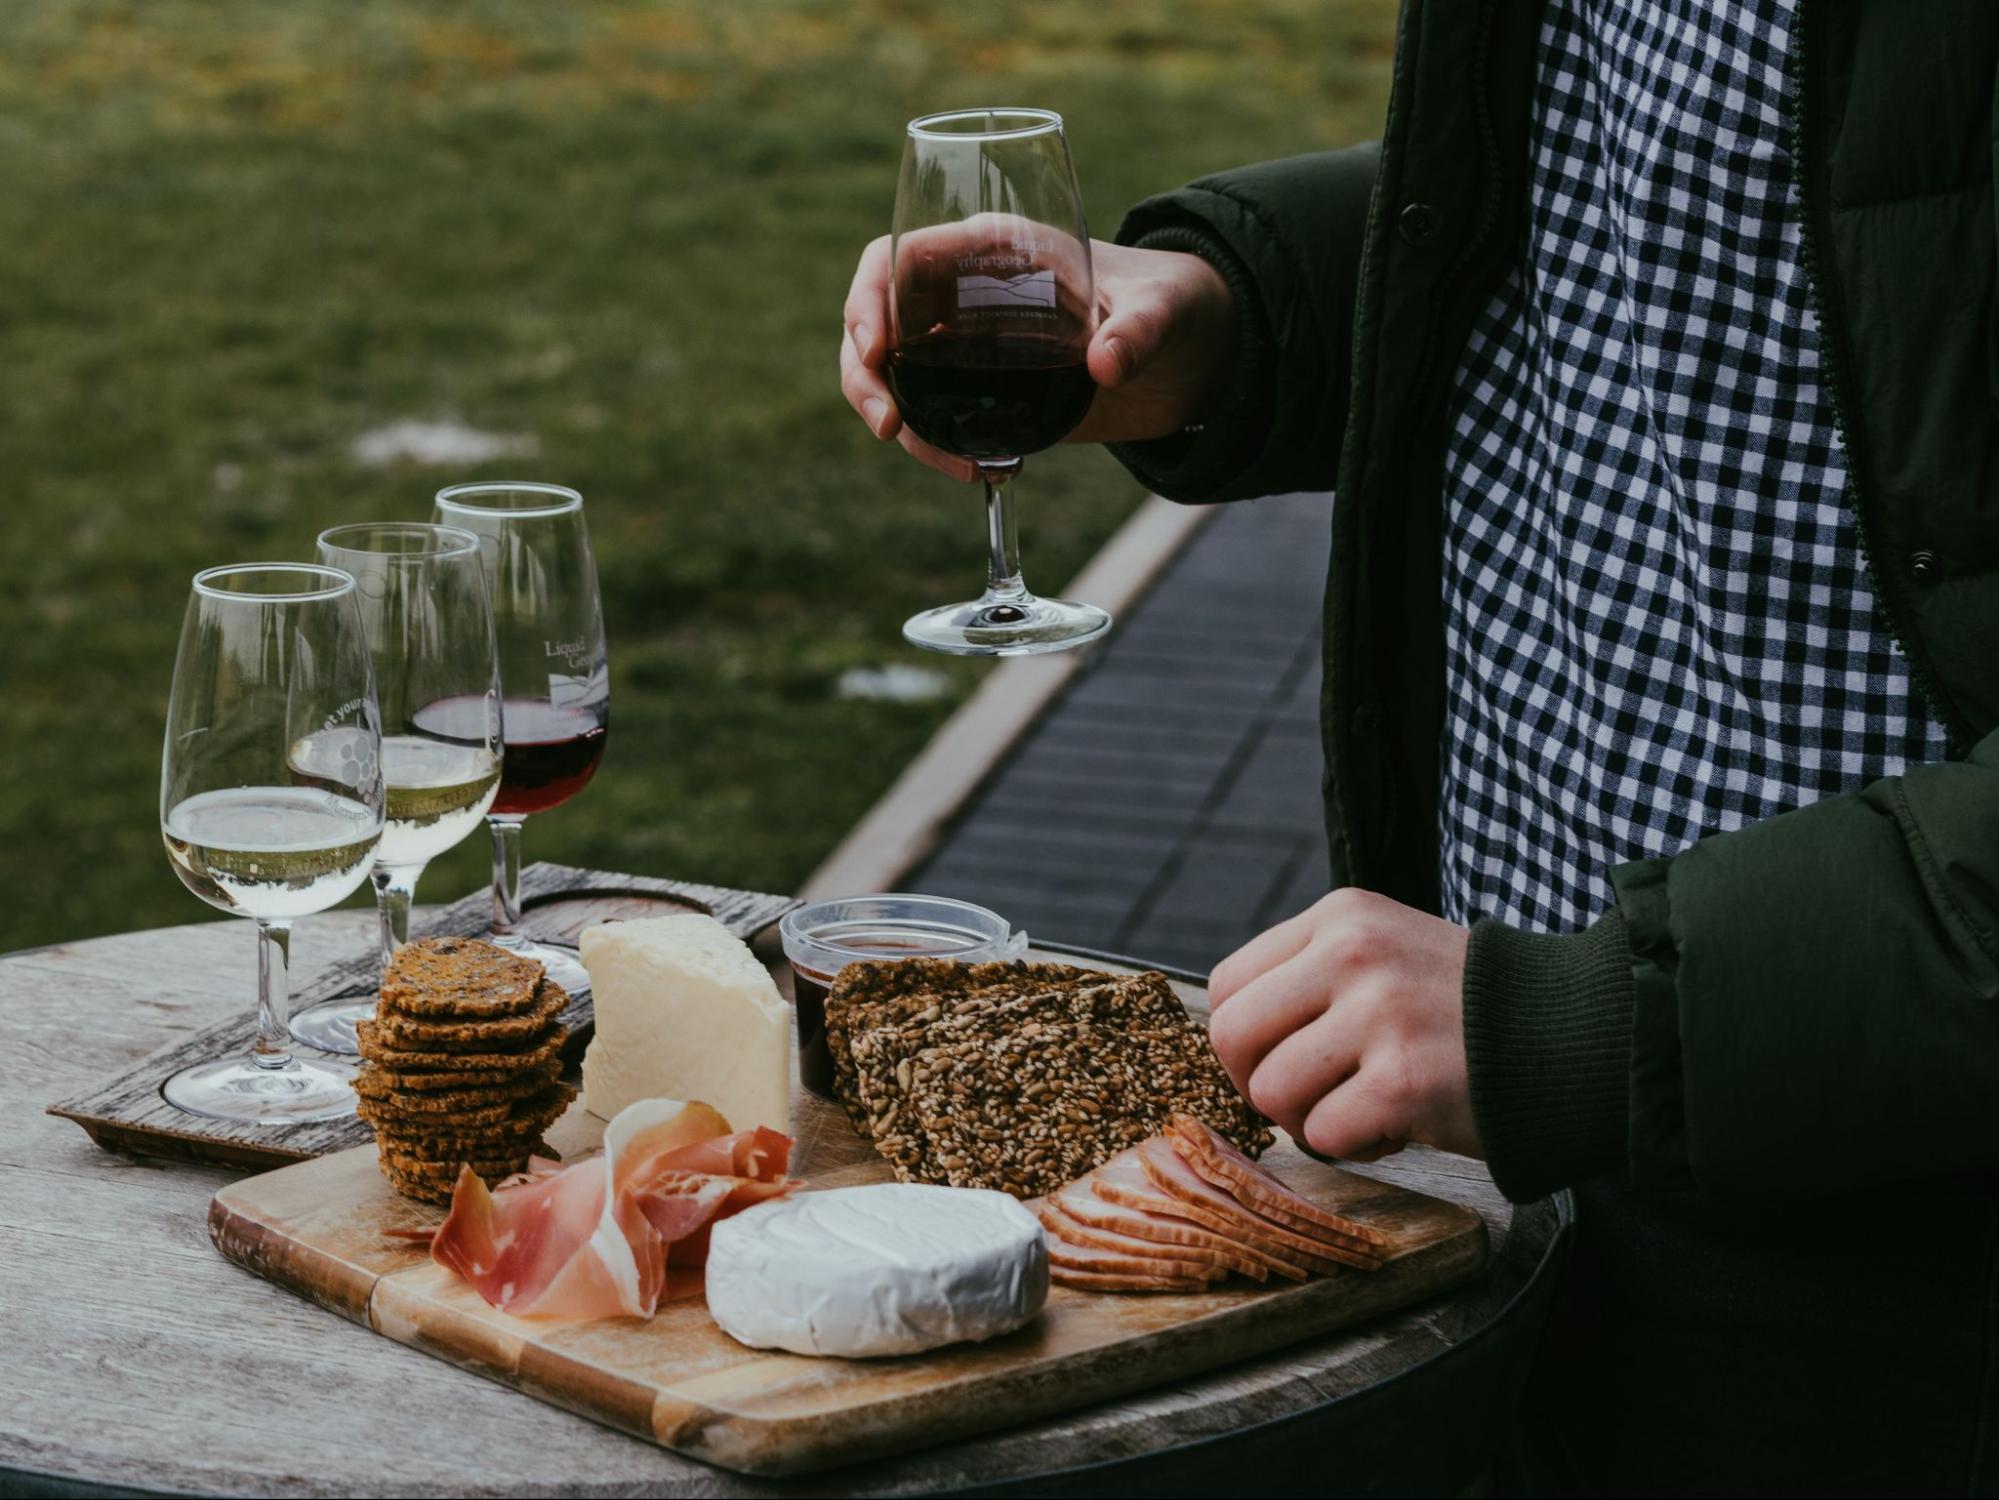 Man holding a glass of wine and selecting items from a cheese board